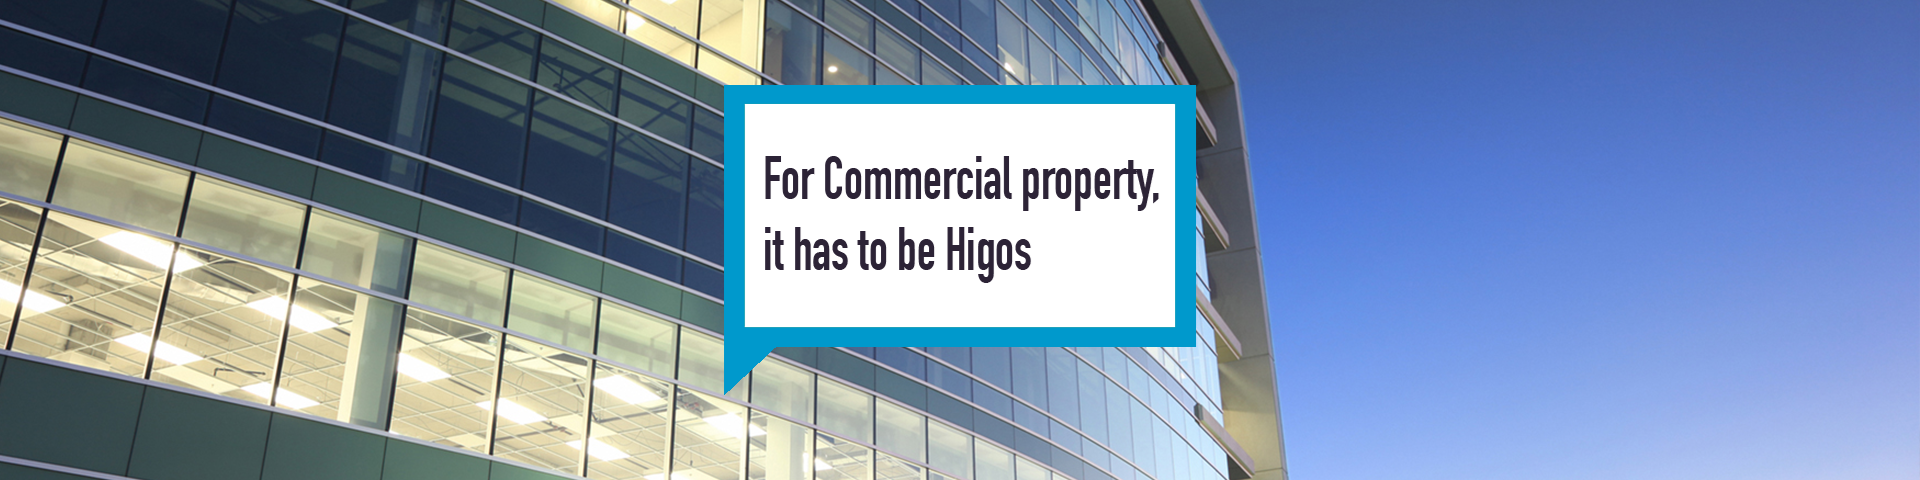 Higos business insurance commercial property